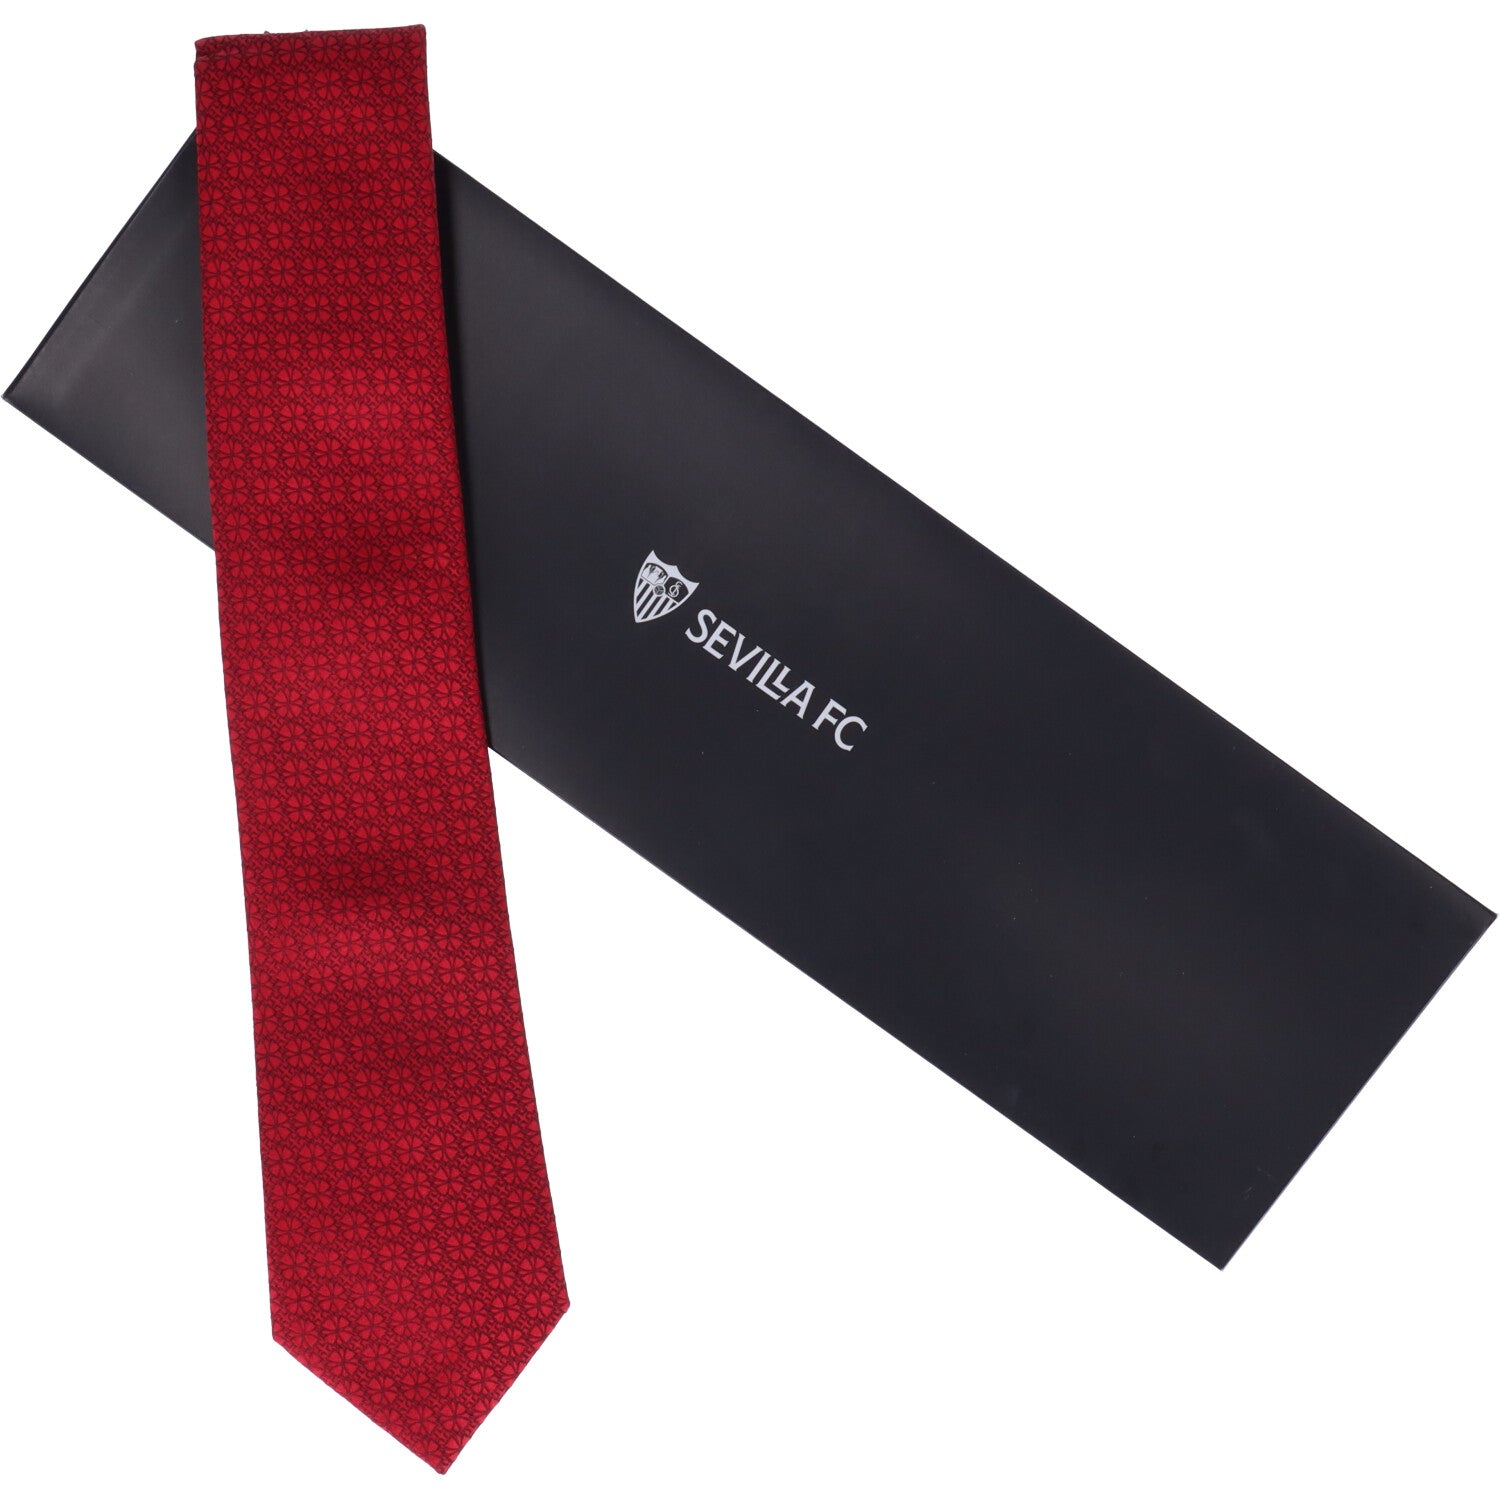 Red tie with black clover shape Crests